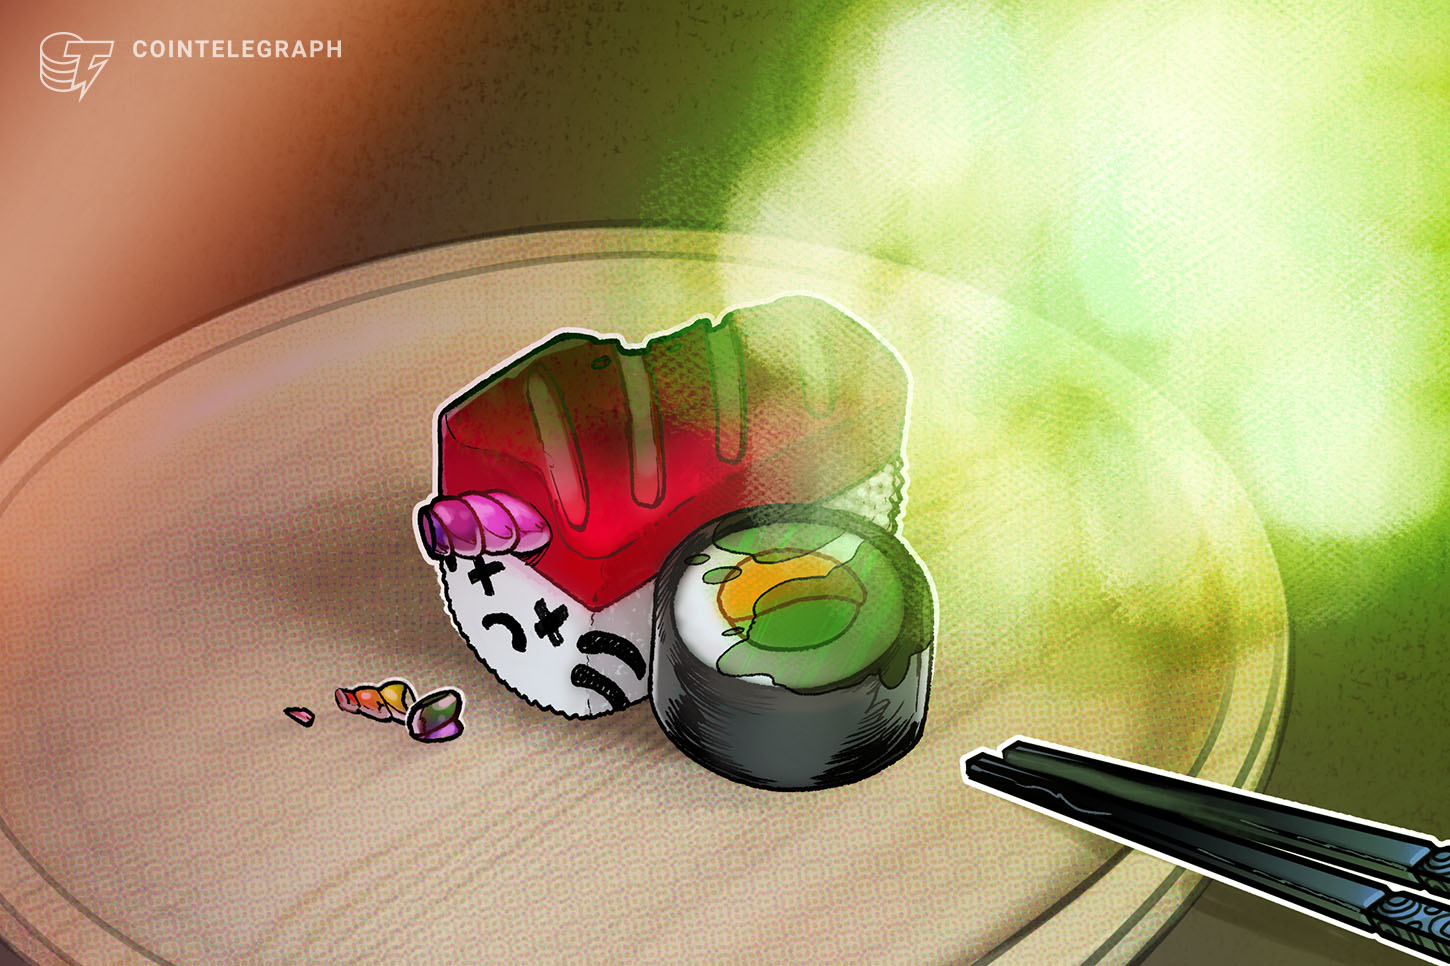 Binance shouldn’t have listed SUSHI